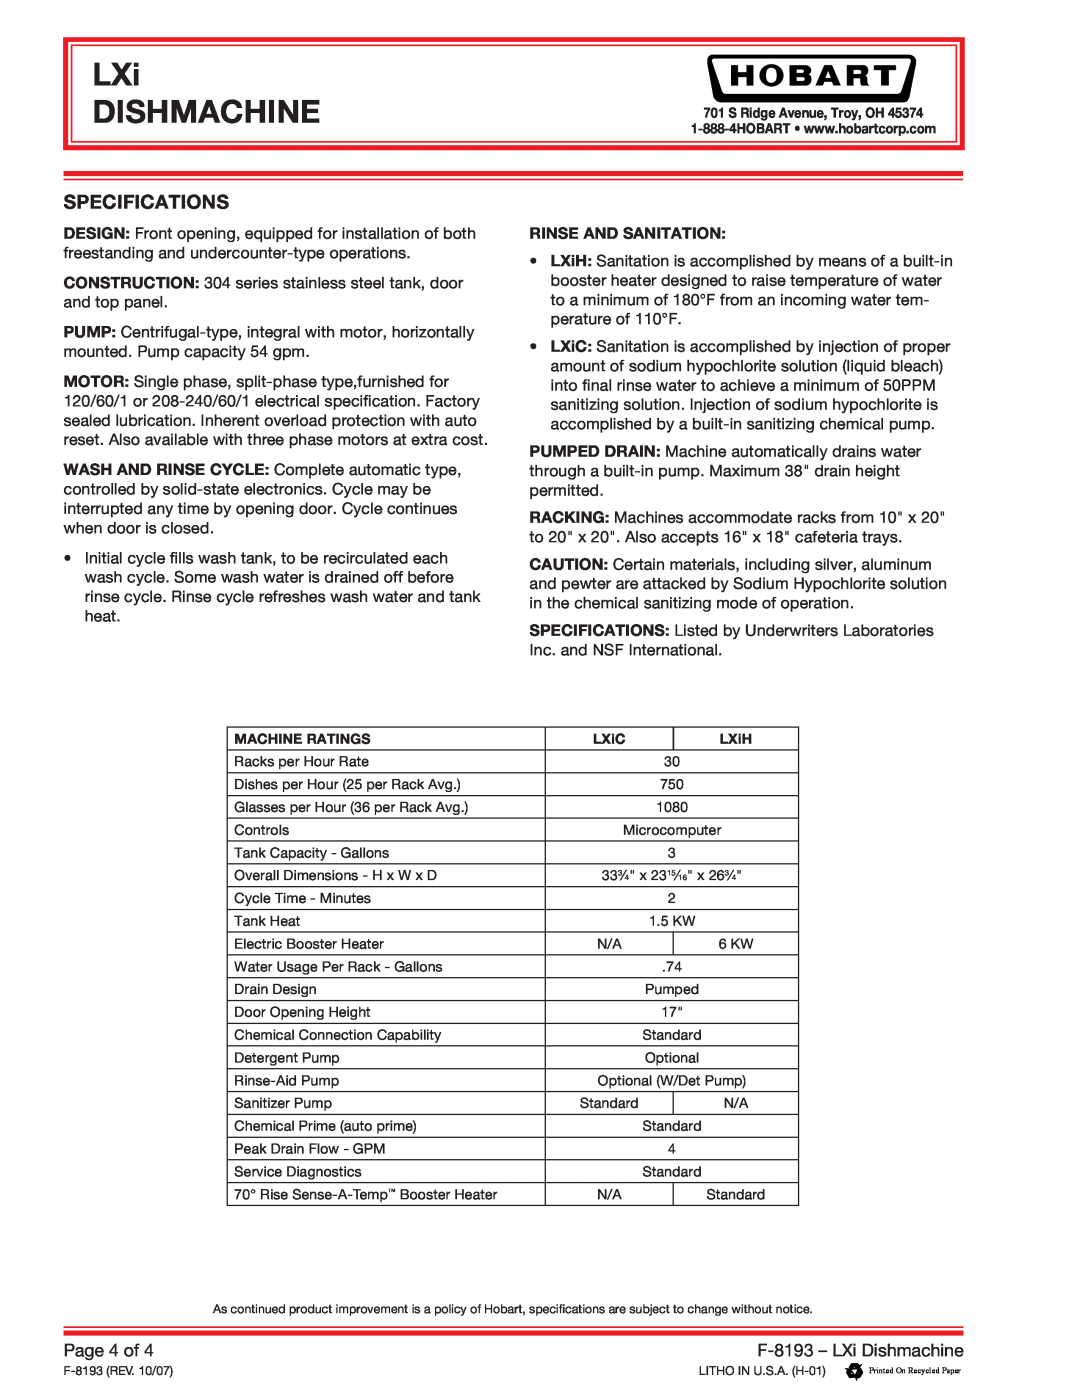 Hobart LXI specifications Specifications, LXi DISHMACHINE, Page 4 of, F-8193- LXi Dishmachine, Rinse And Sanitation 